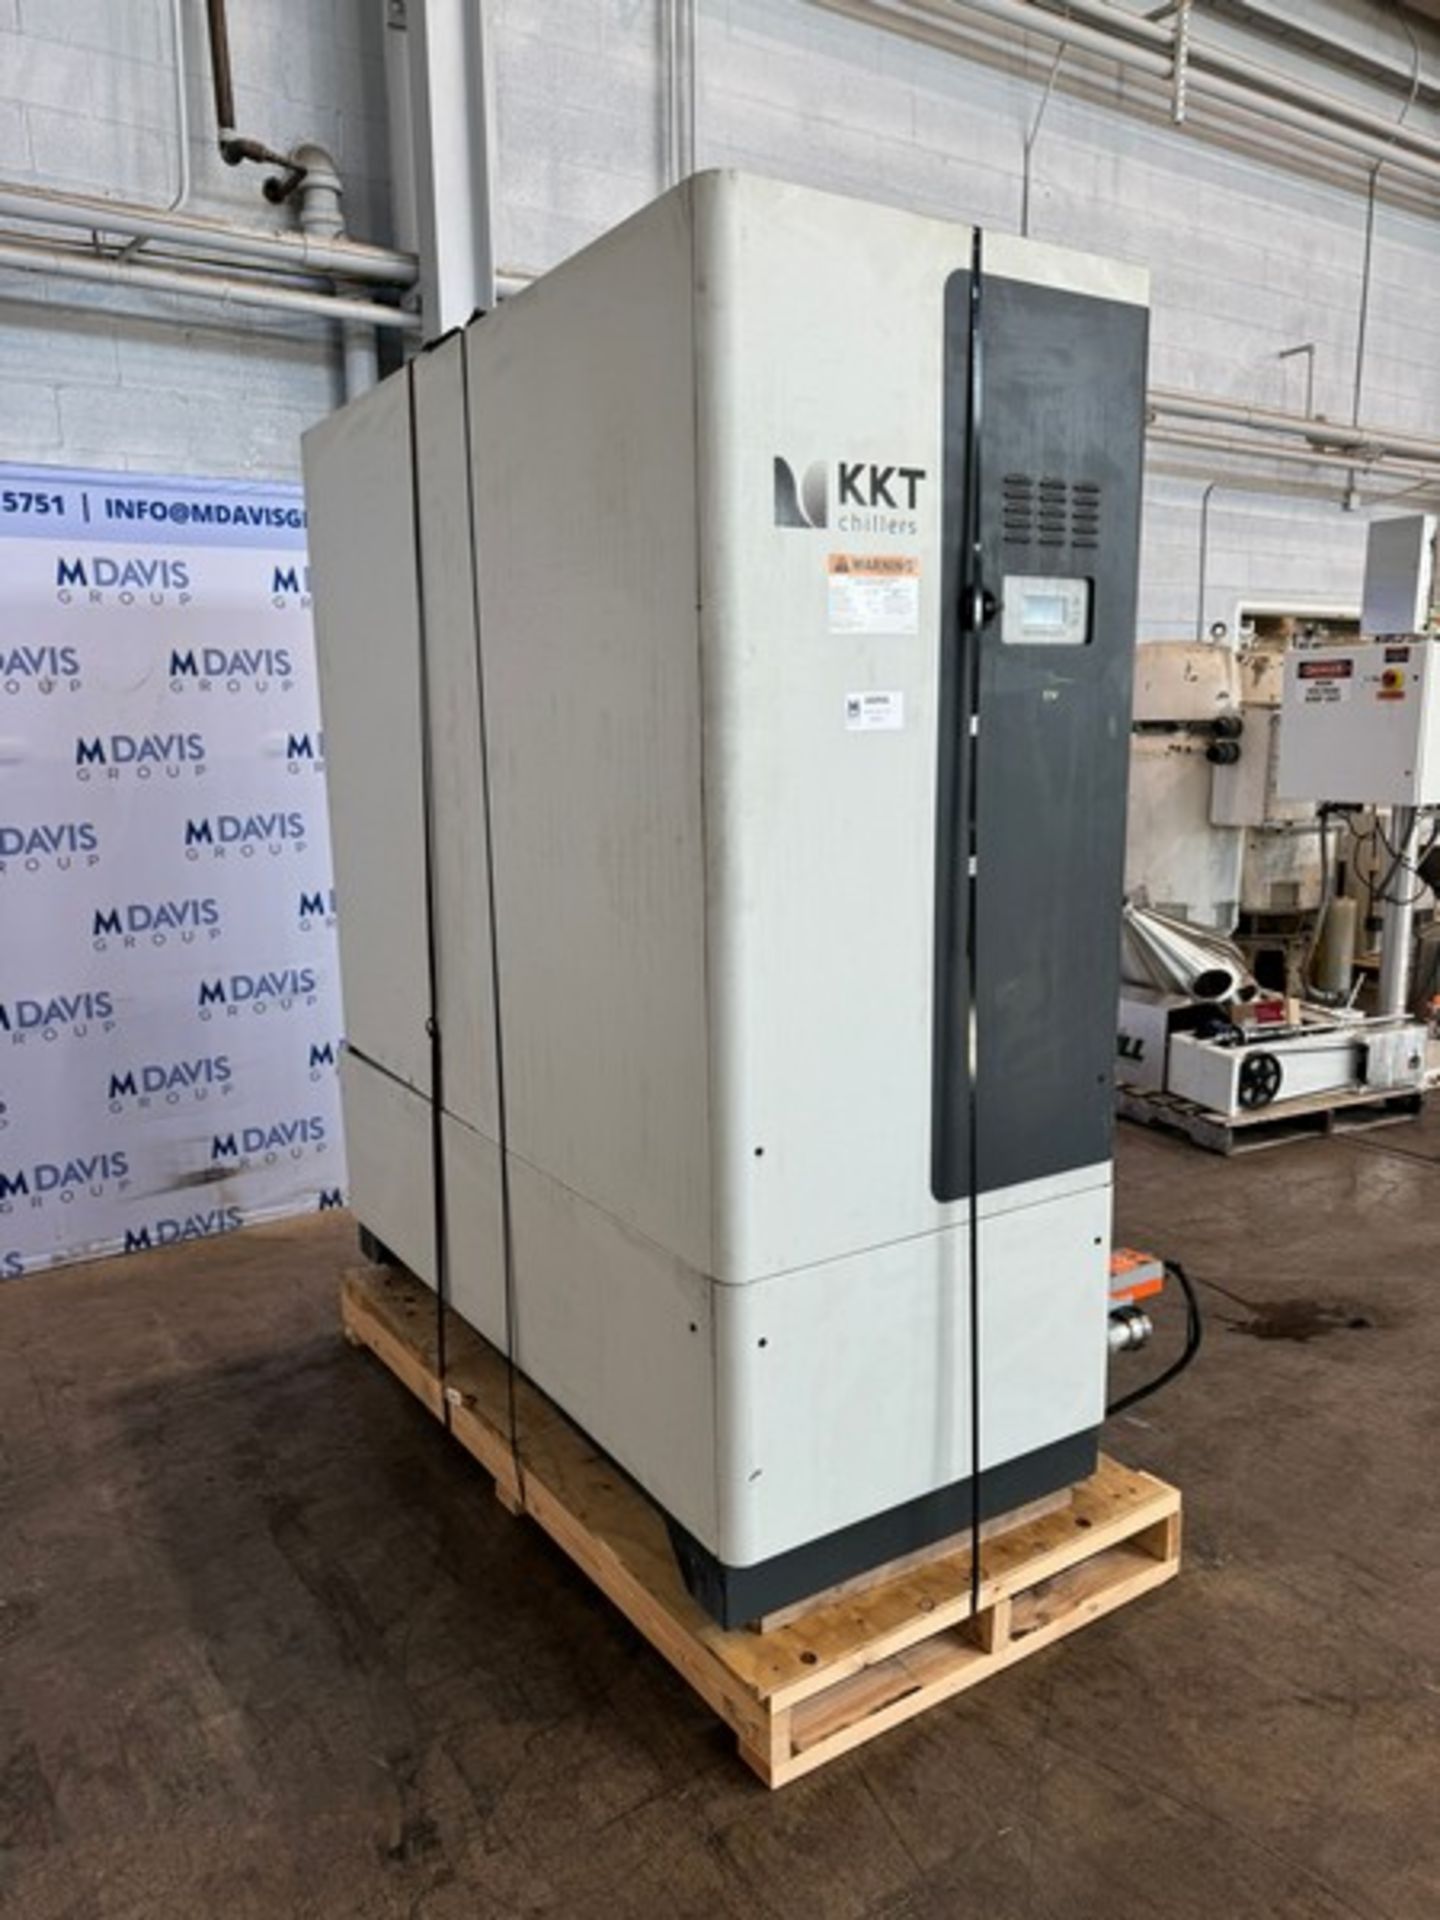 2017 KKT Chiller, Type: CBOXX90, S/N 90901498, 460 Volts, 3 Phase(INV#102931) (Located @ the MDG - Image 2 of 6